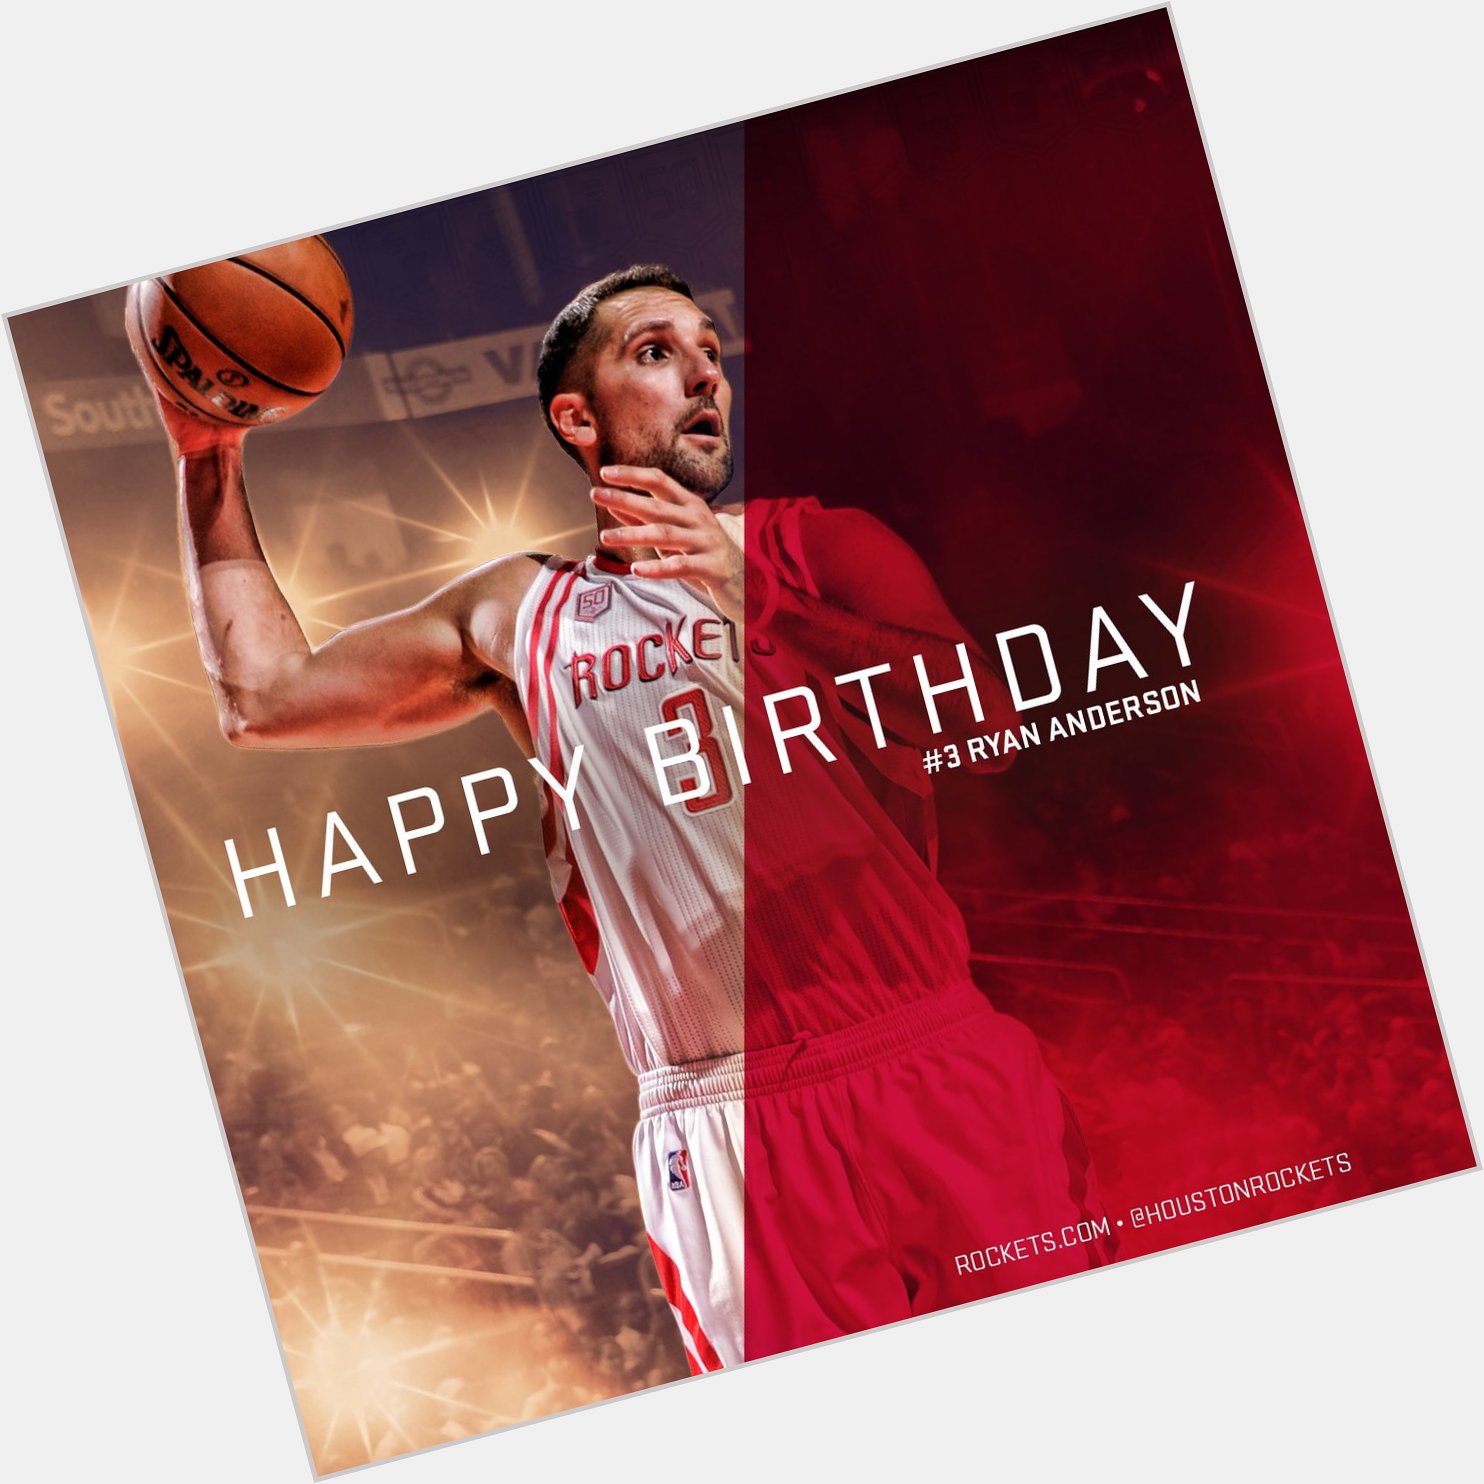 To wish a very Happy Birthday to Ryan Anderson!   